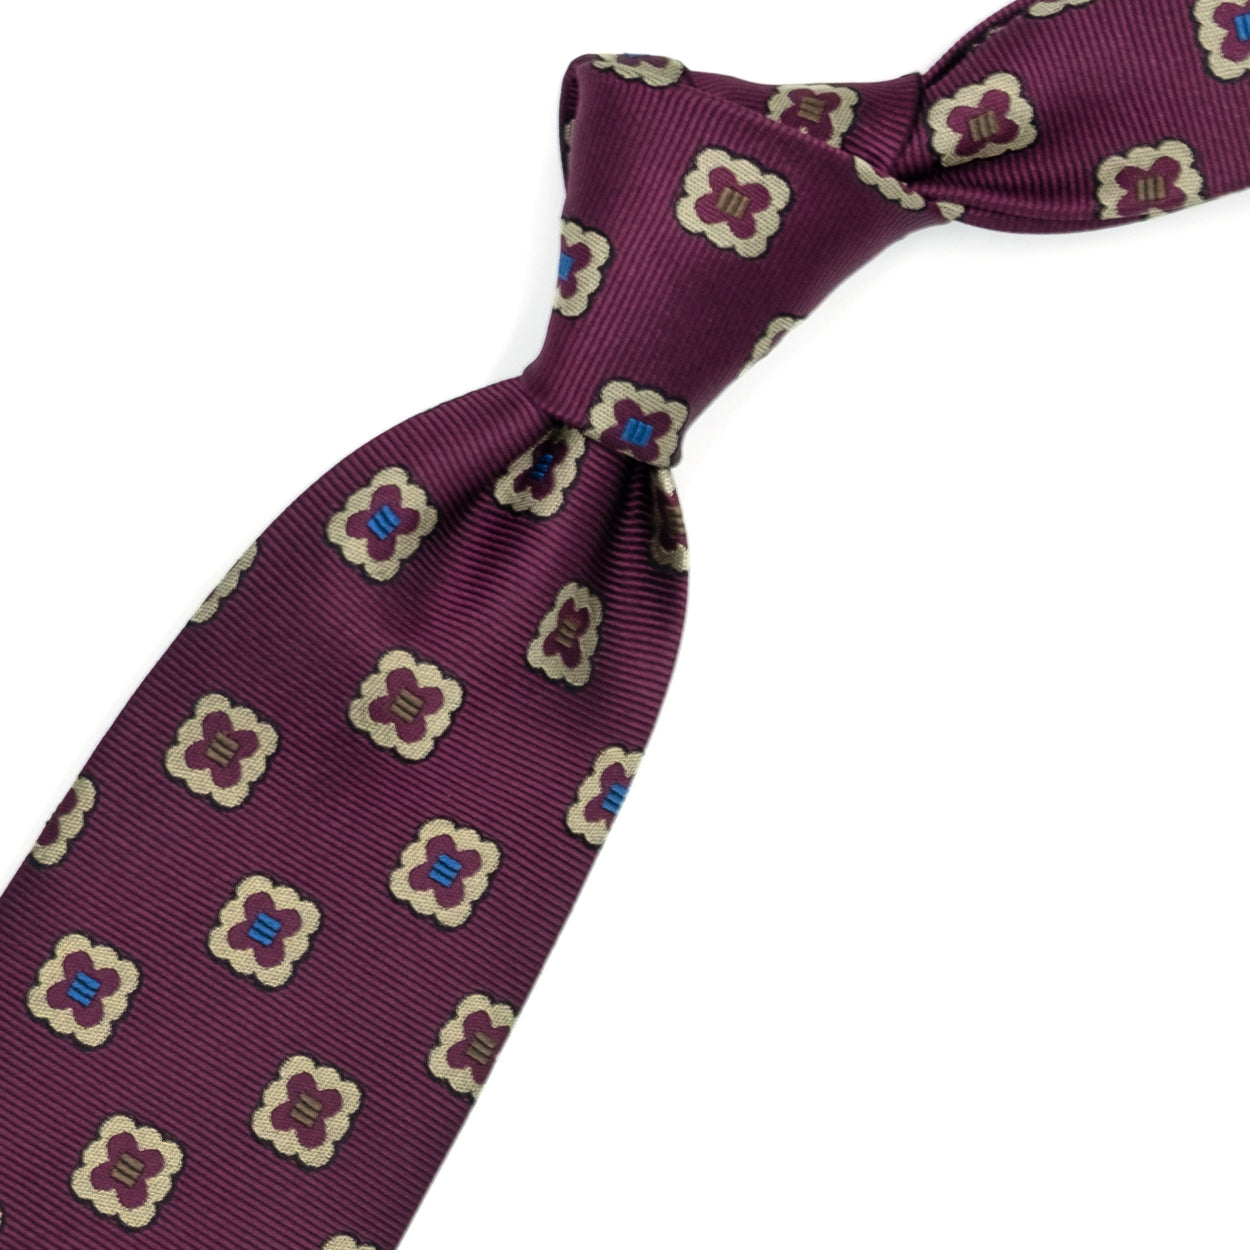 Burgundy tie with gold flowers and blue squares